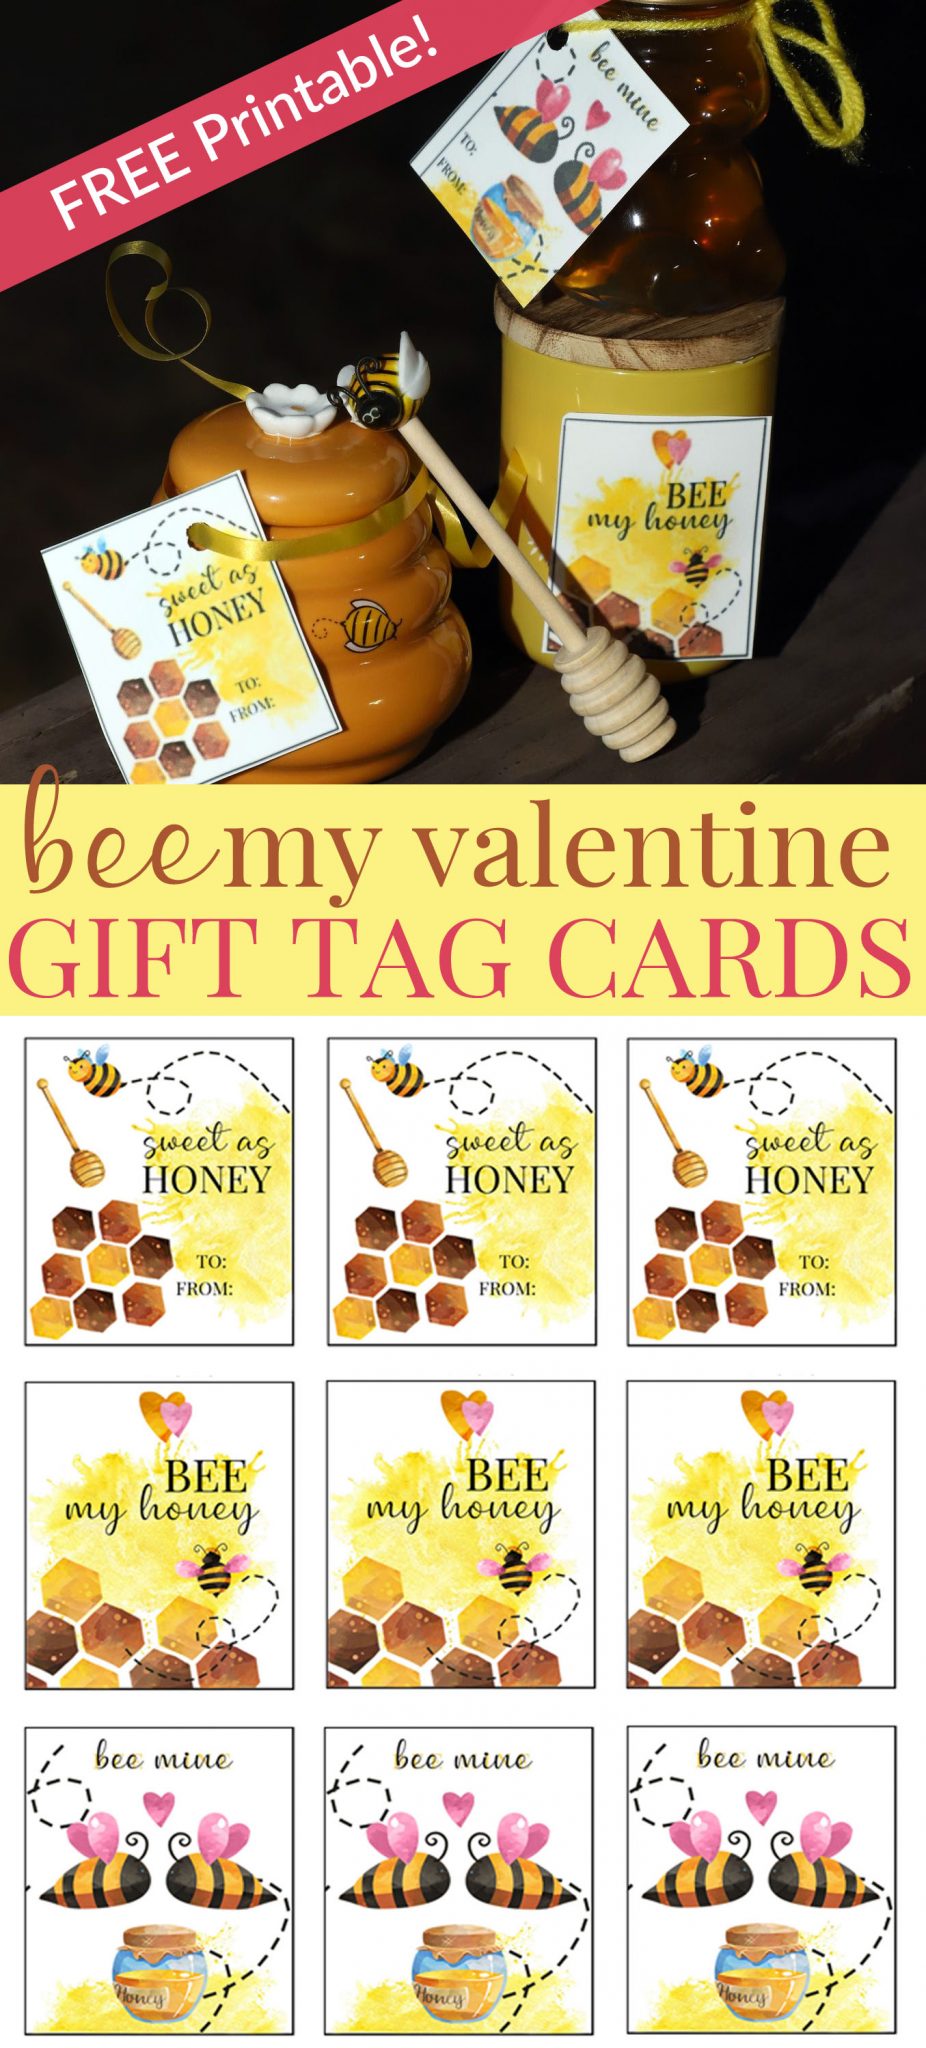 Bee Mine Printable Valentine Gift Tag Cards - For the Love of Food